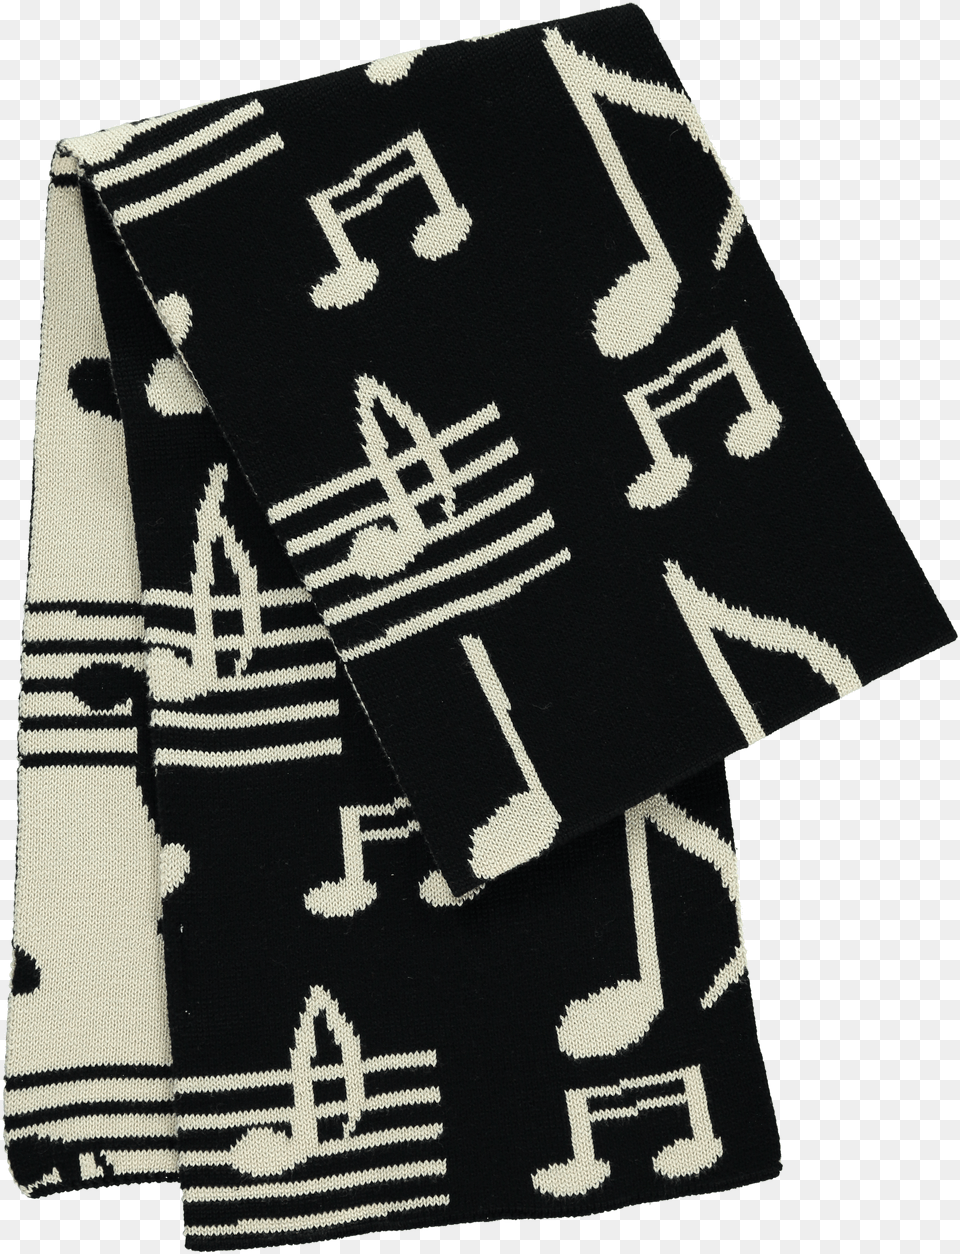 Beau Loves Black Amp Off White Music Jacquard Scarf Free Png